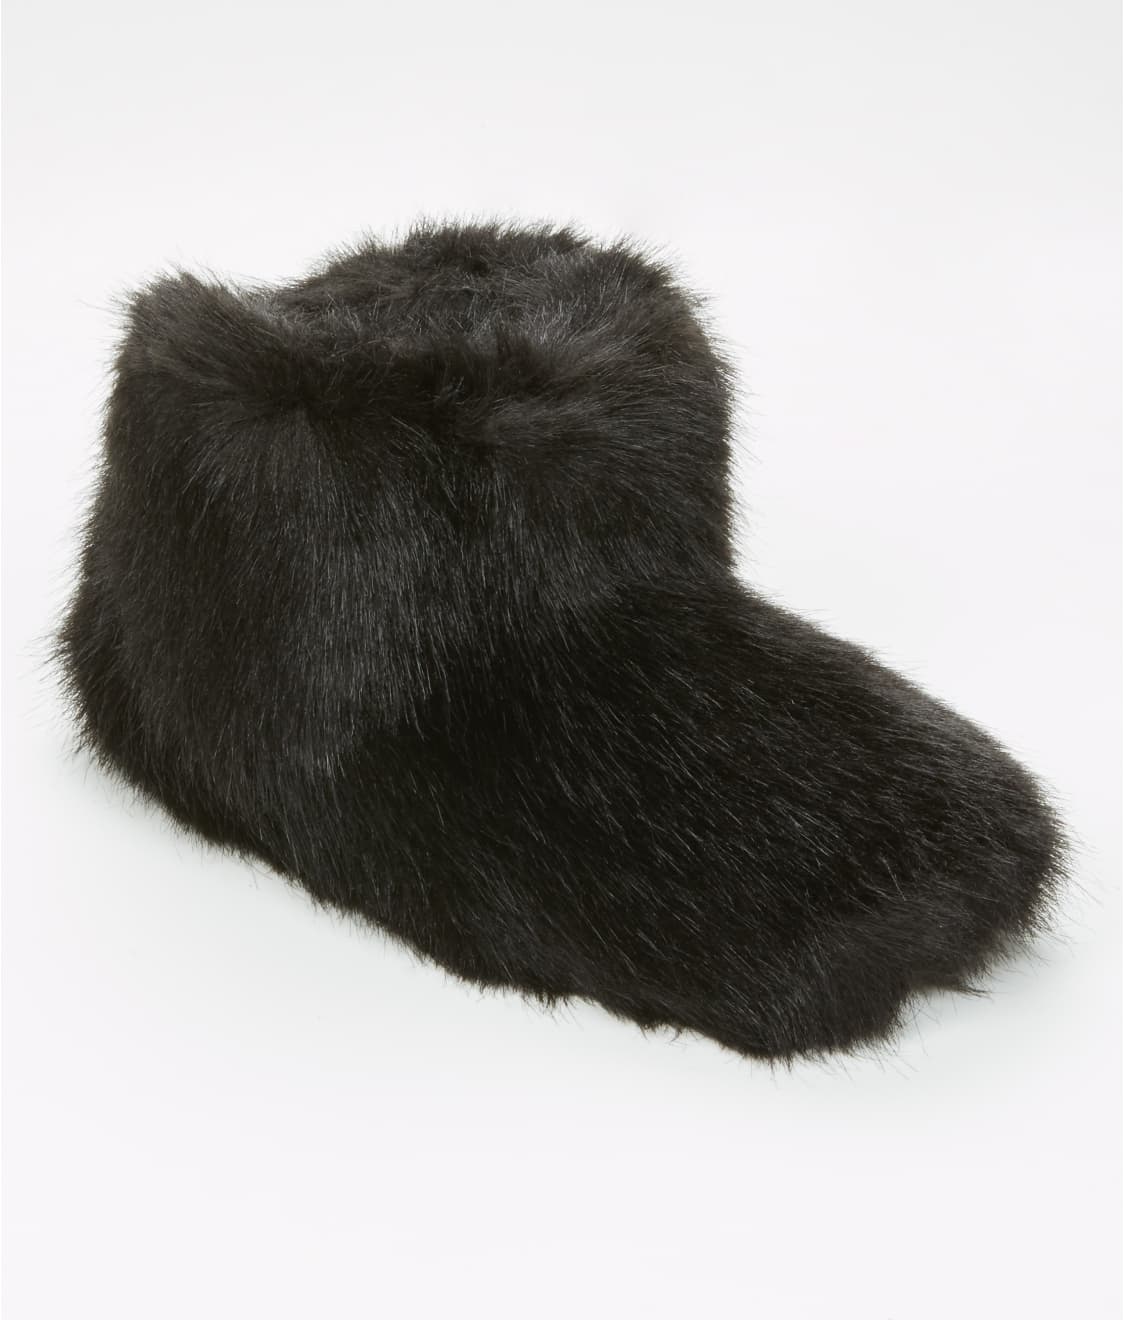 UGG: Amary Fur Bootie Slippers 1103861